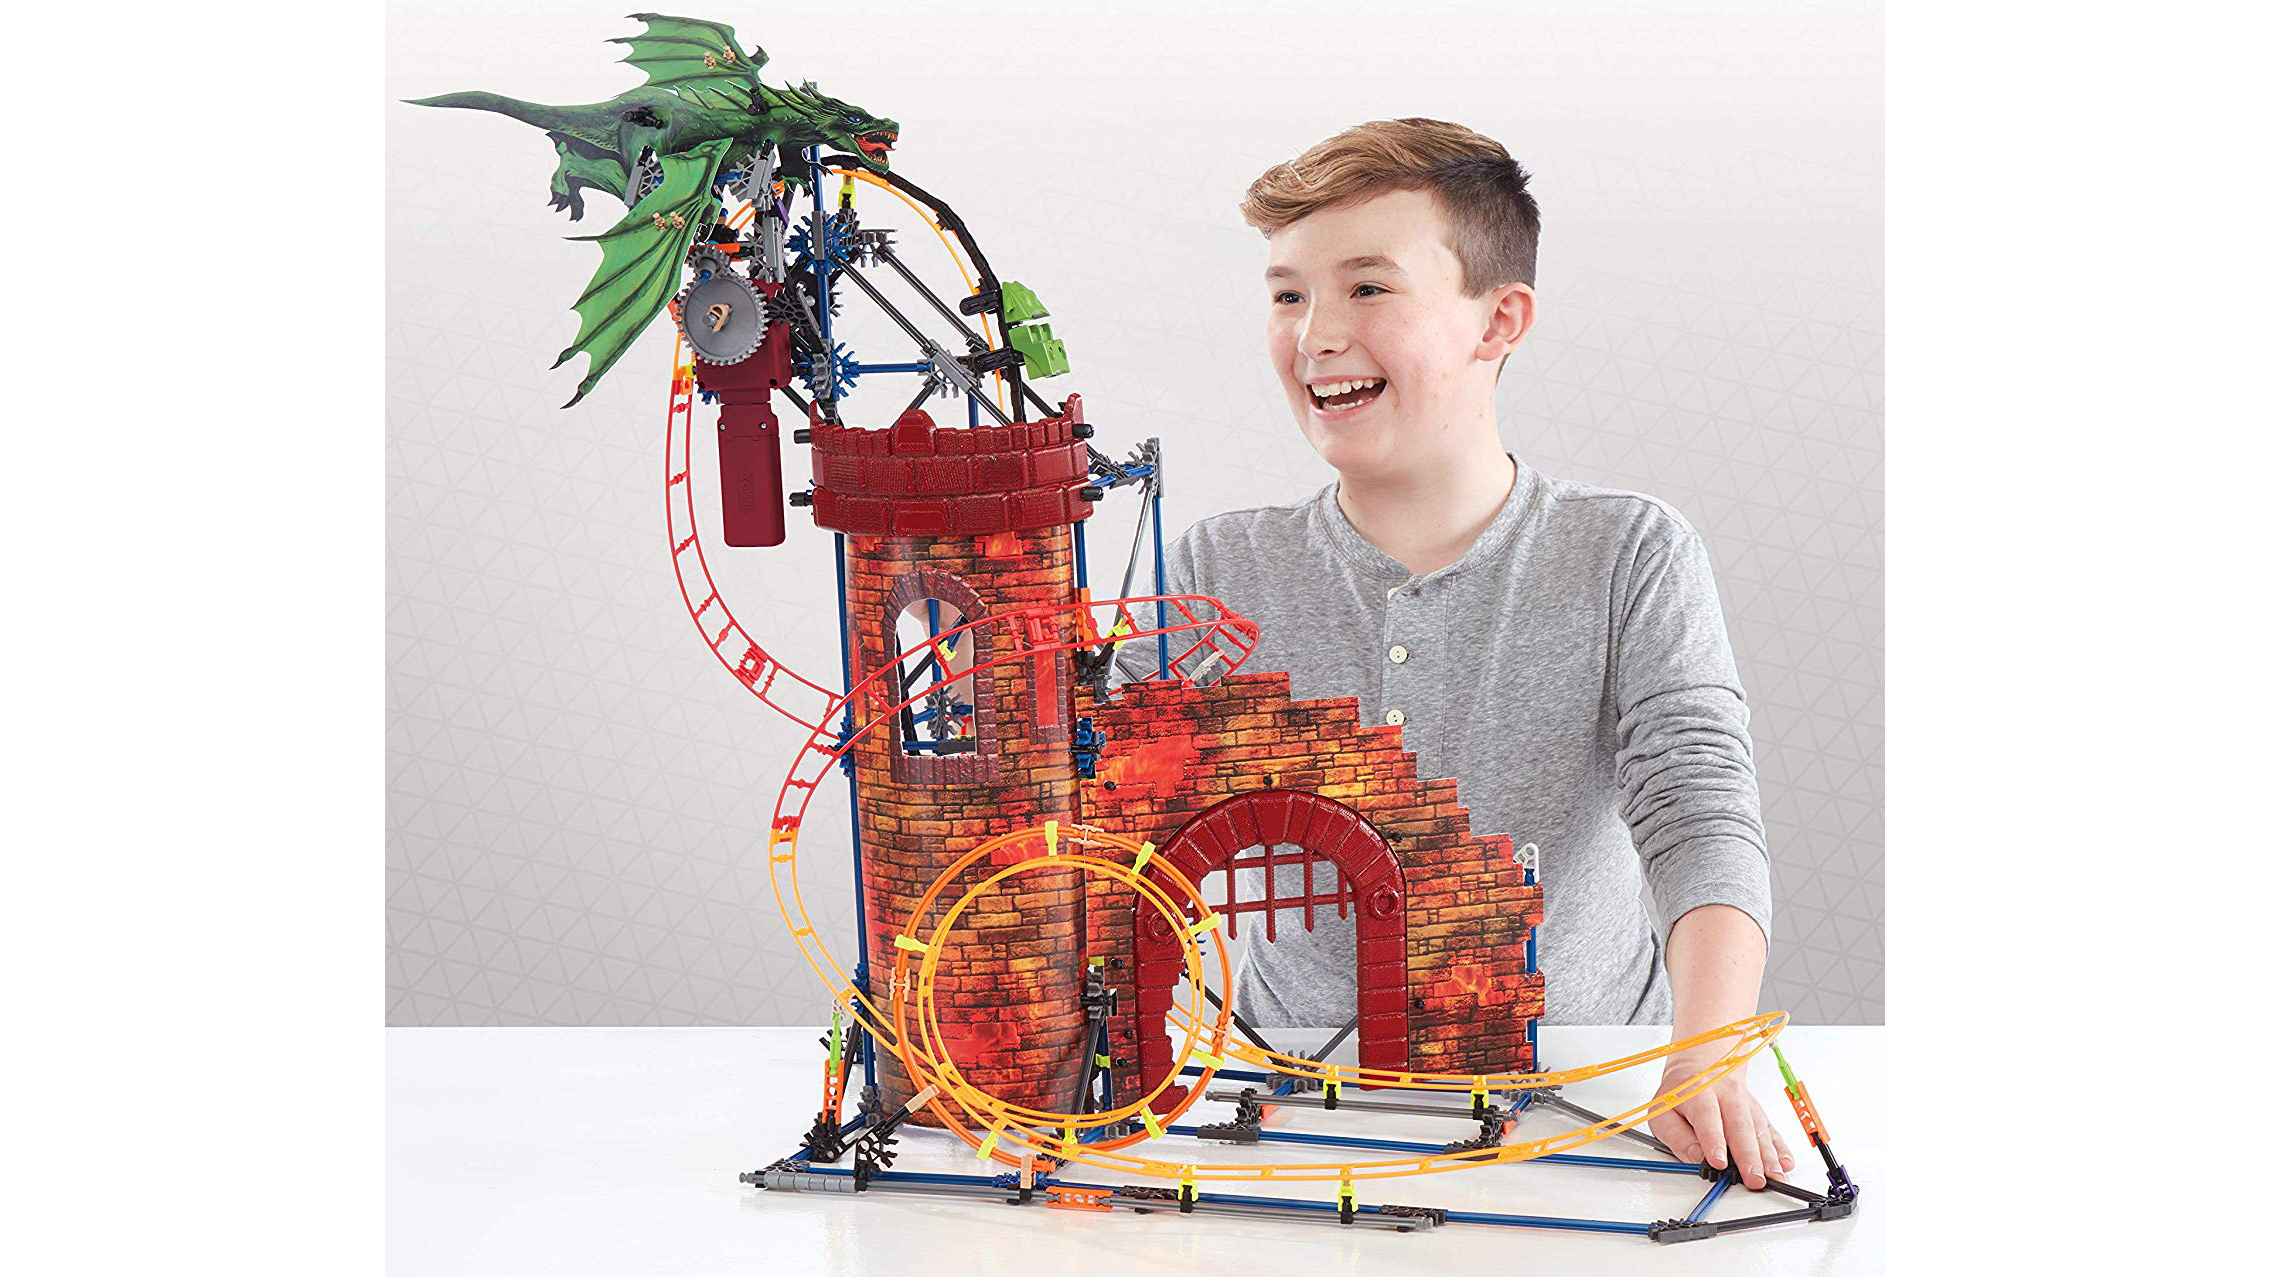 knex for 4 year olds